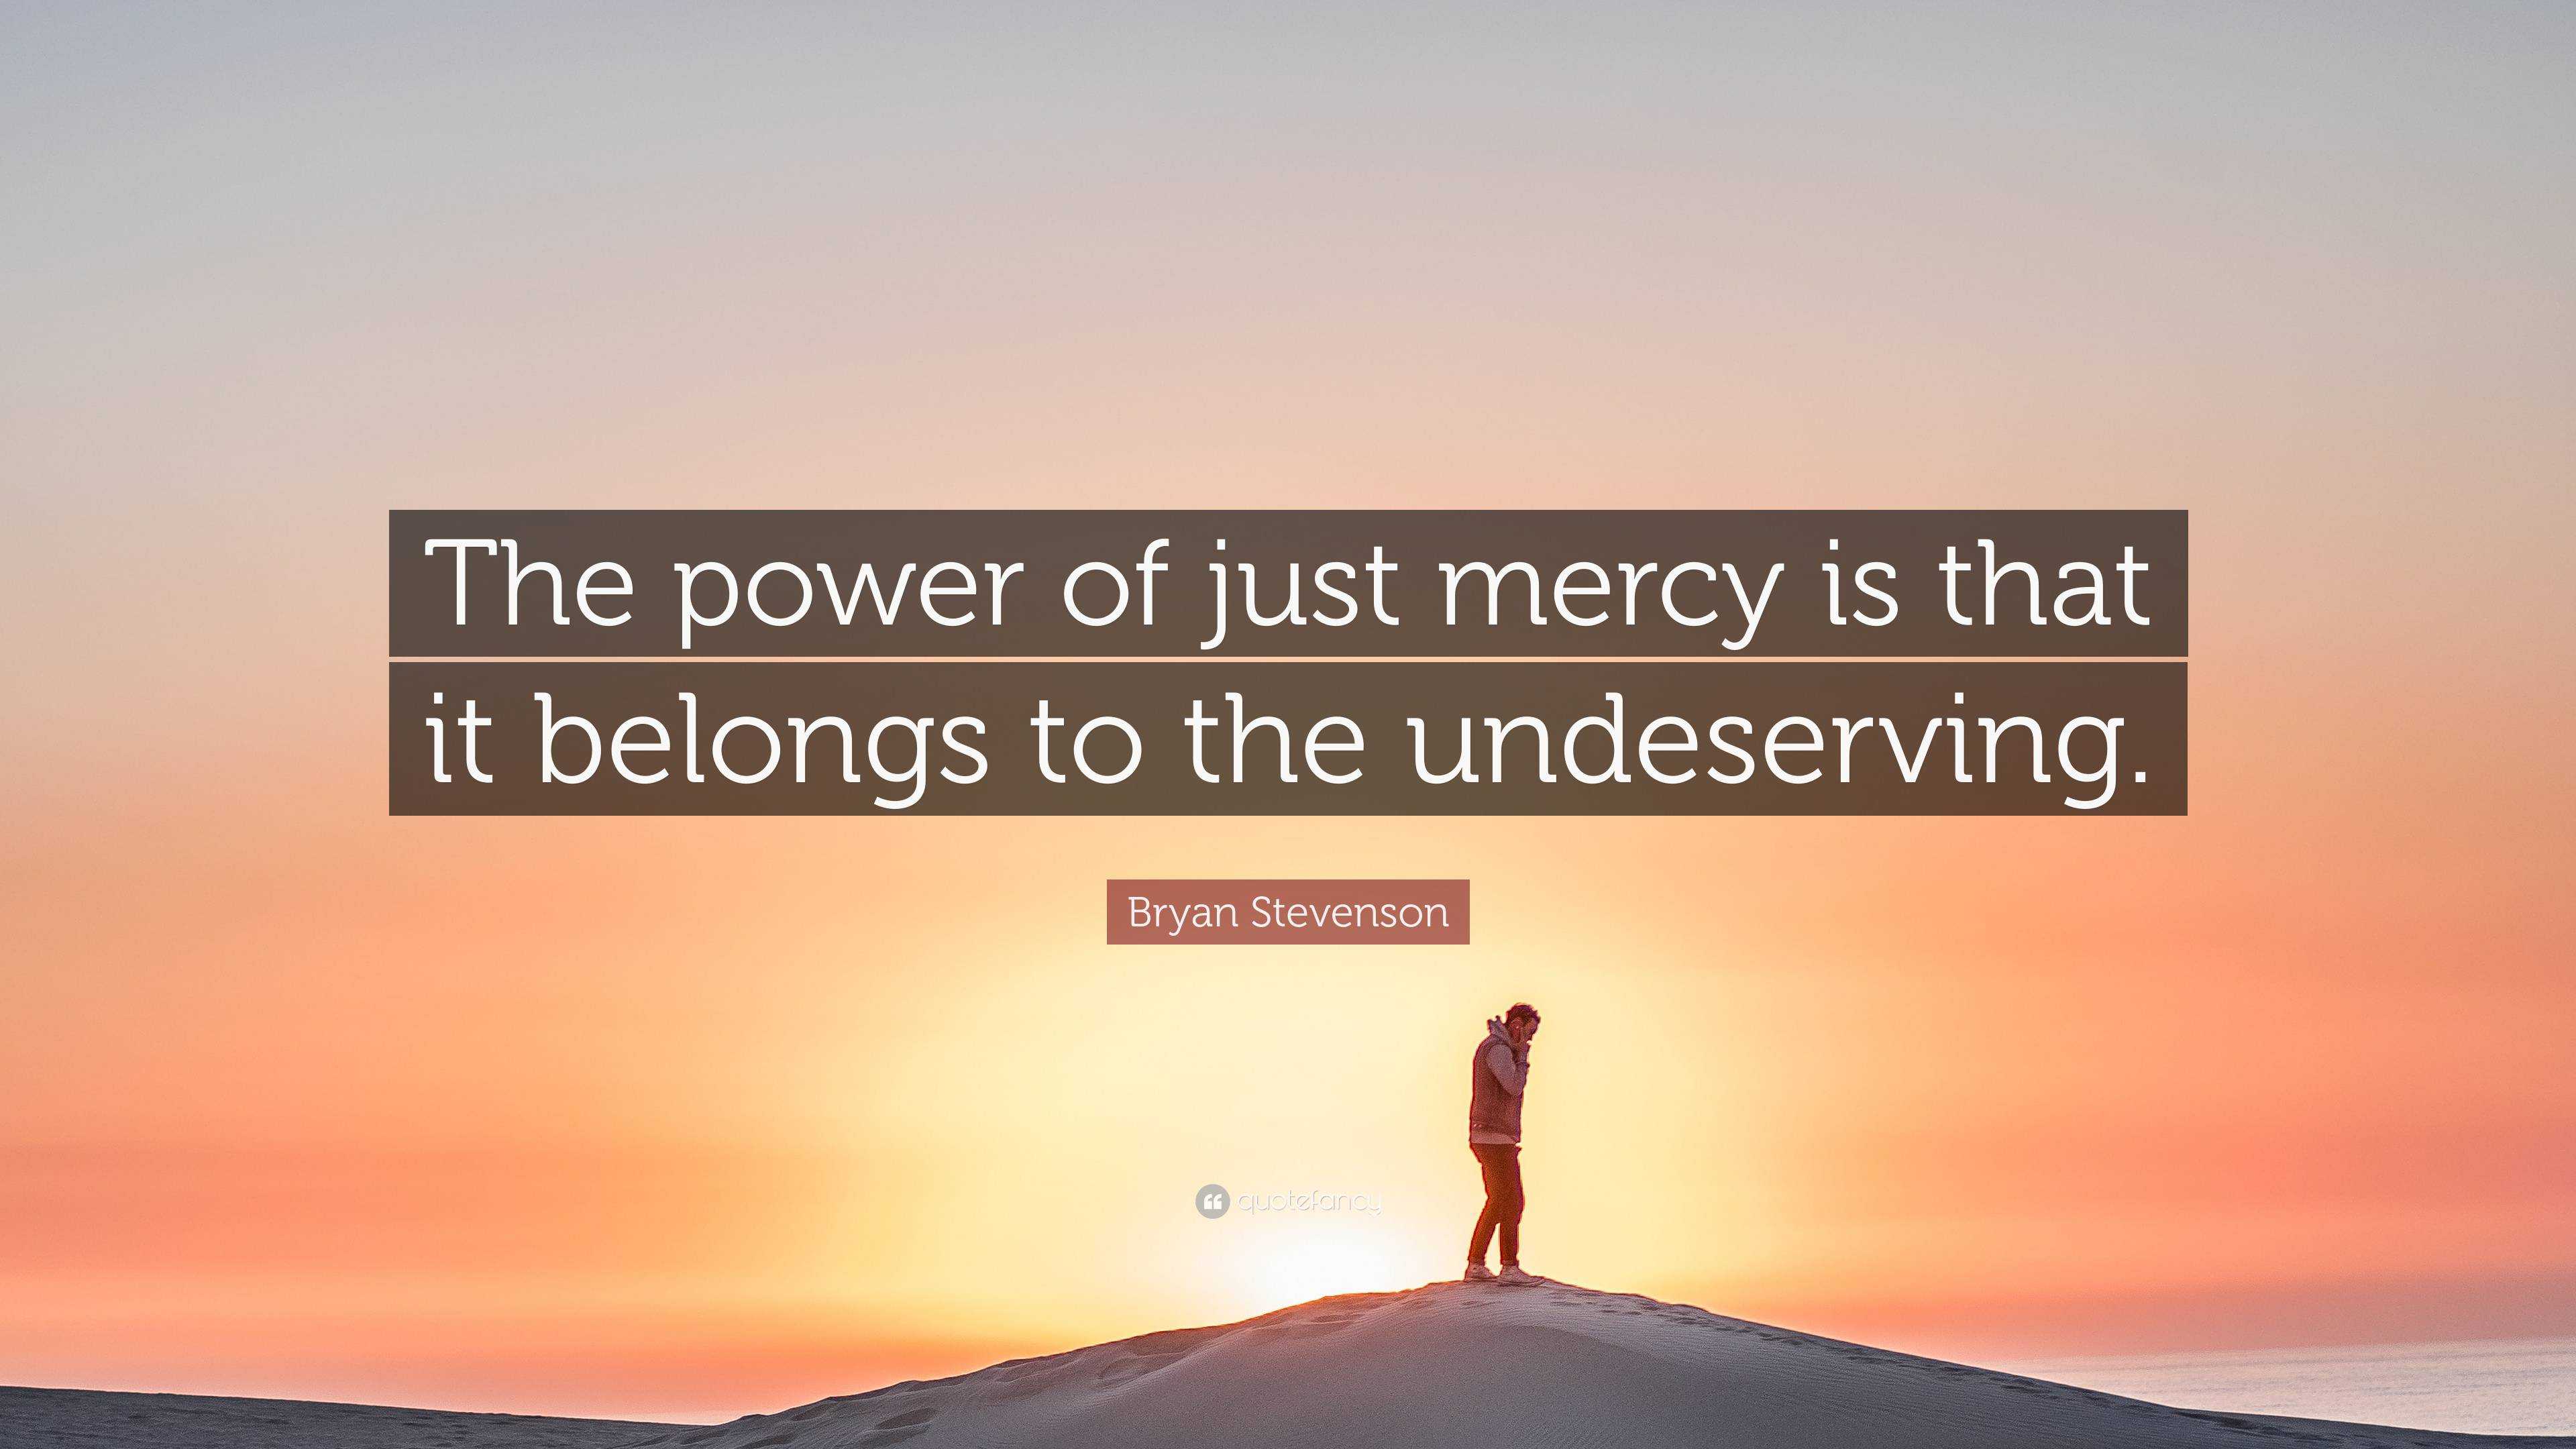 Bryan Stevenson Quote The Power Of Just Mercy Is That It Belongs To The Undeserving